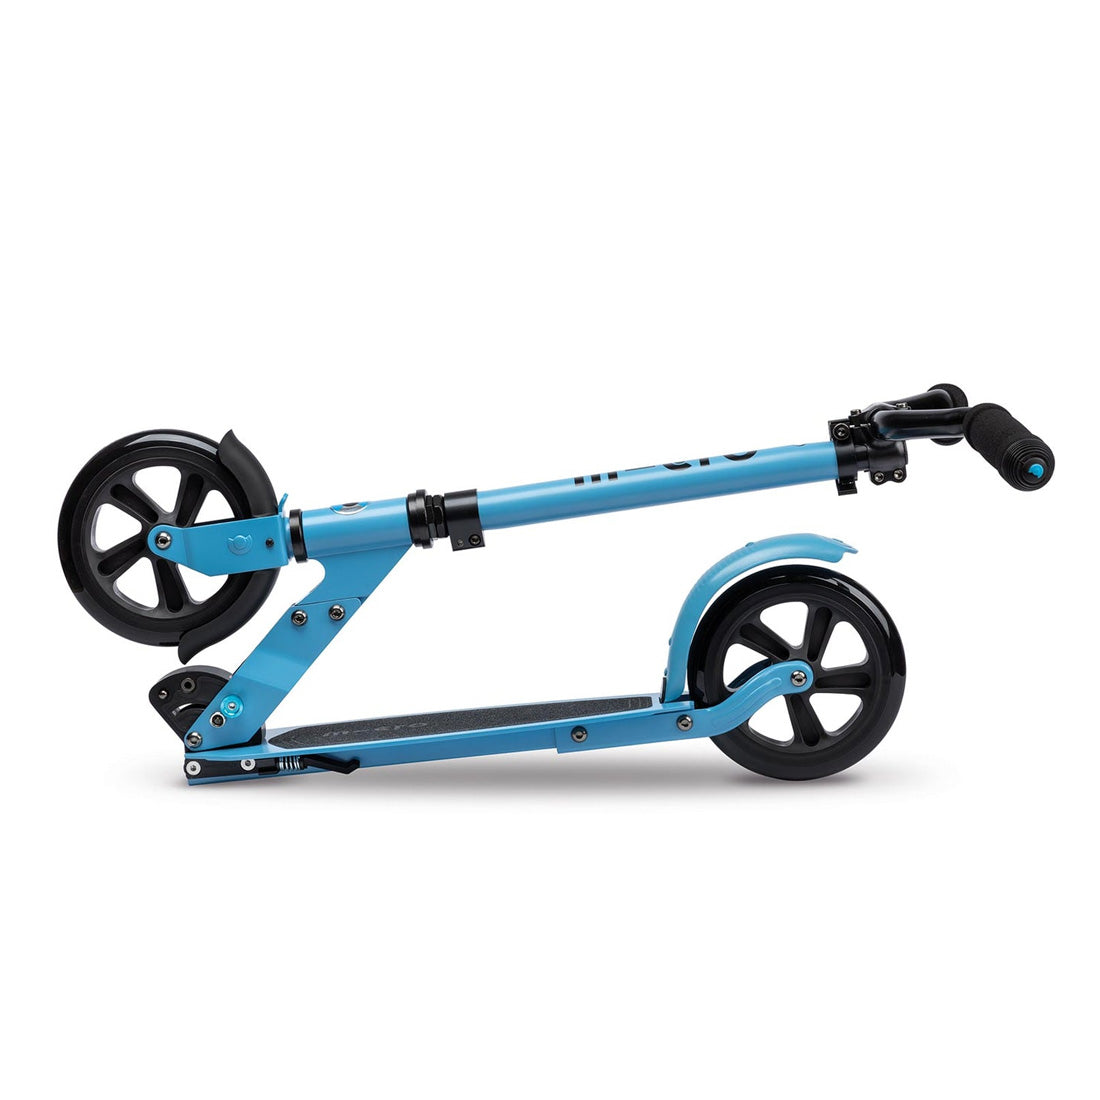 Micro Speed Plus Deluxe Scooter - Alaskan Blue Scooter Completes Rec